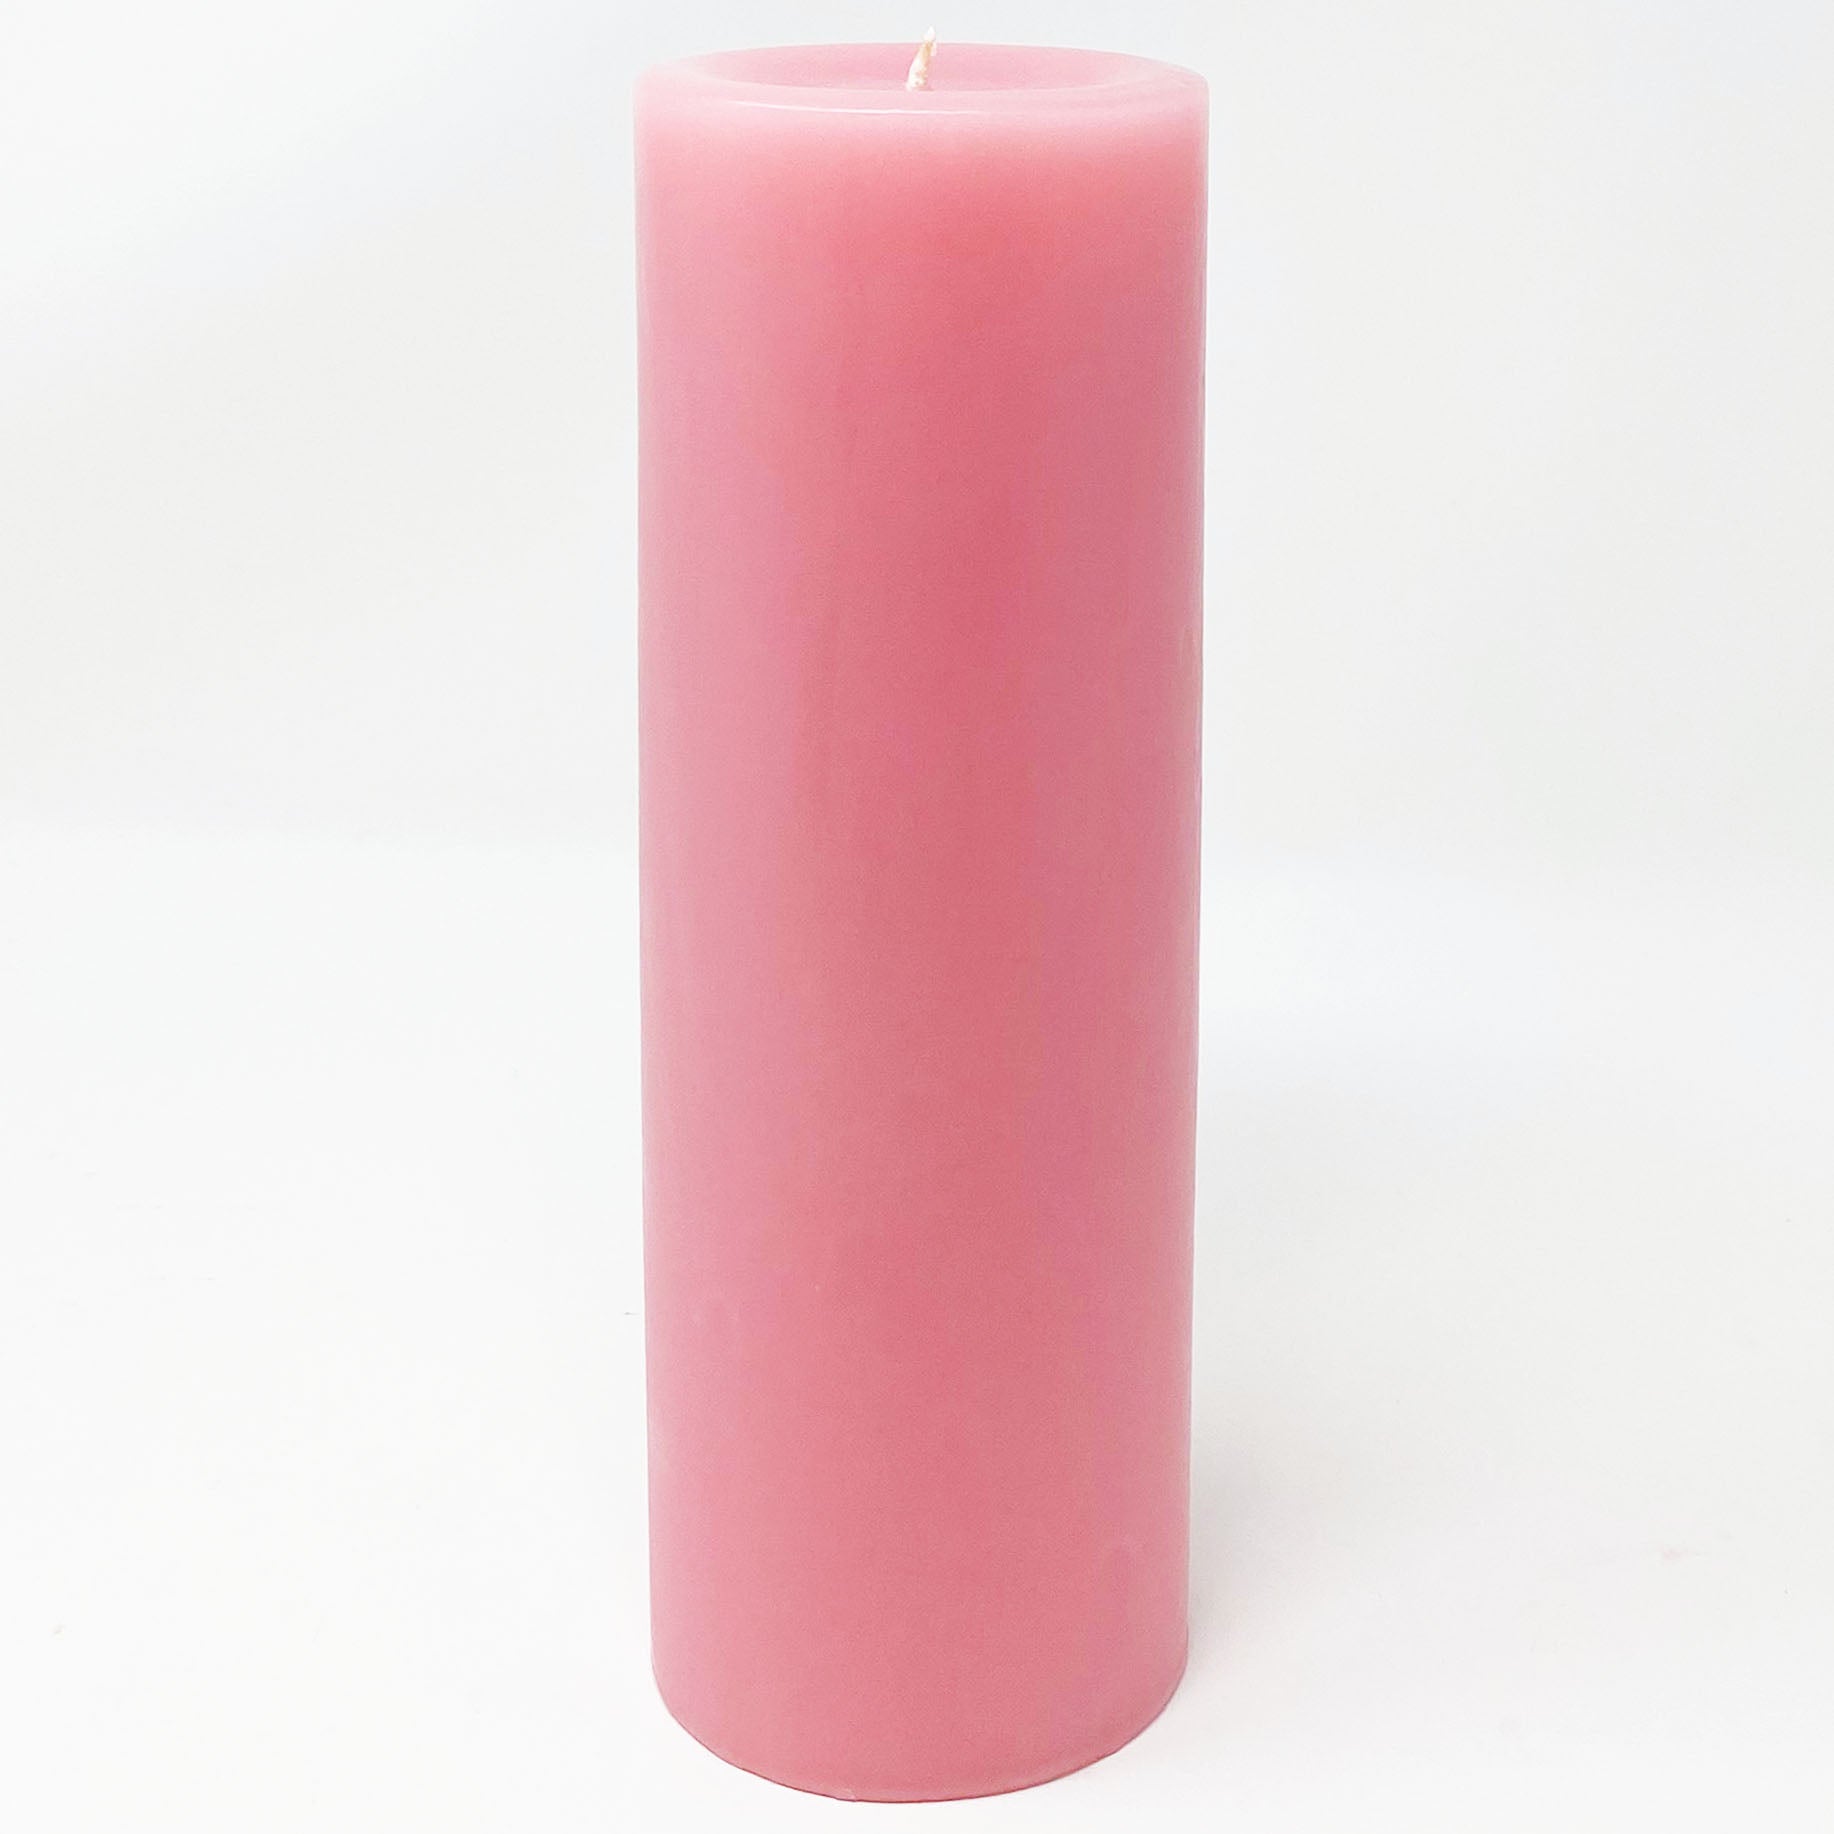 3x9" Dusty Rose Unscented Pillar Candle